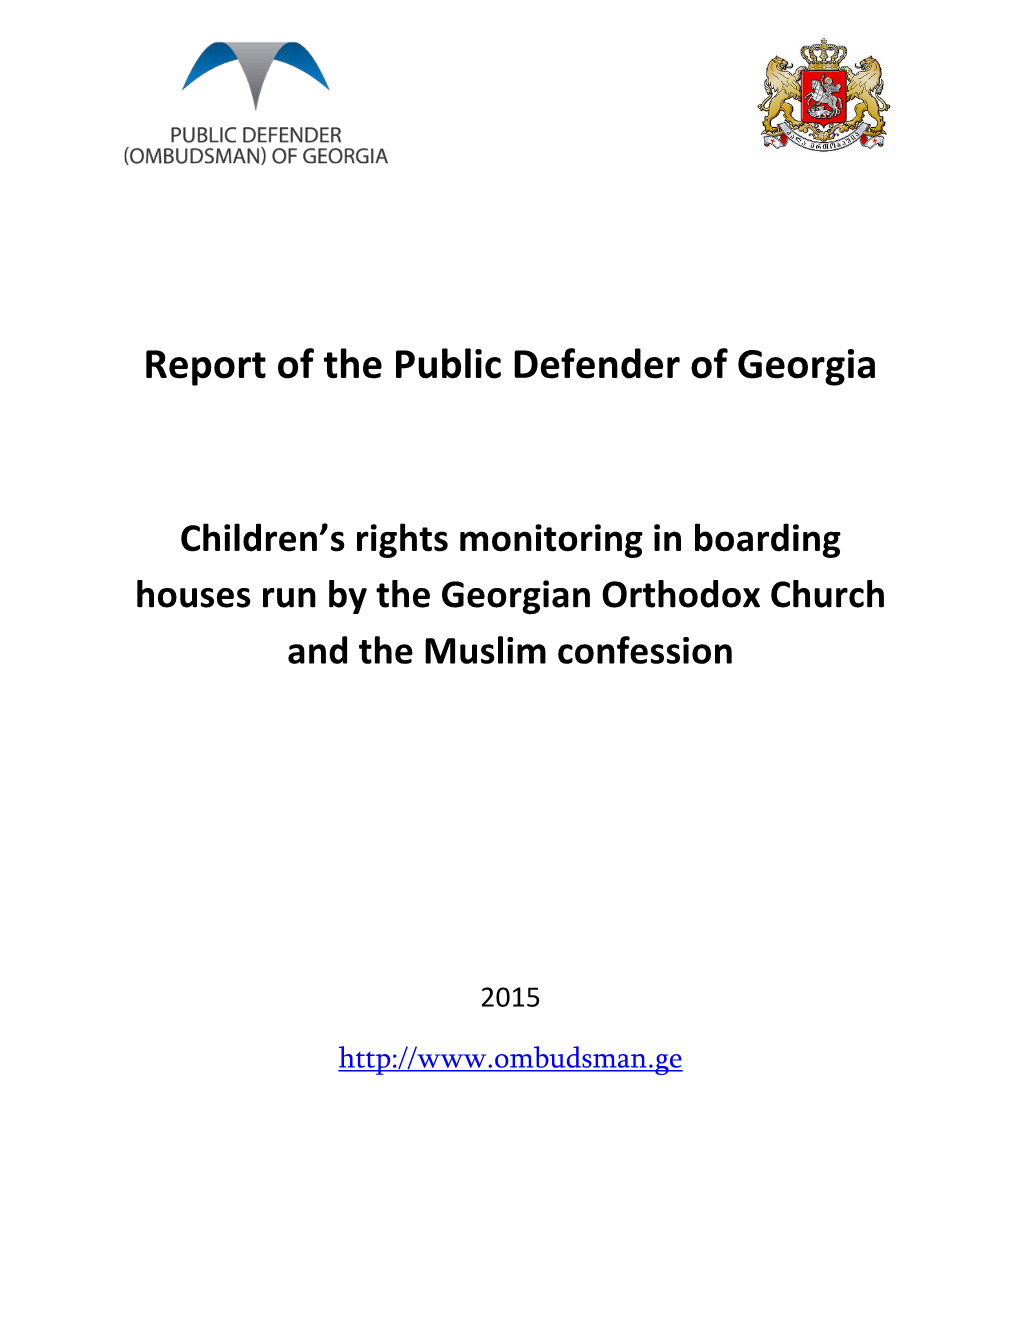 Special Report on the State of Children's Rights in Boarding Schools Subordinated to Georgia's Orthodox Church